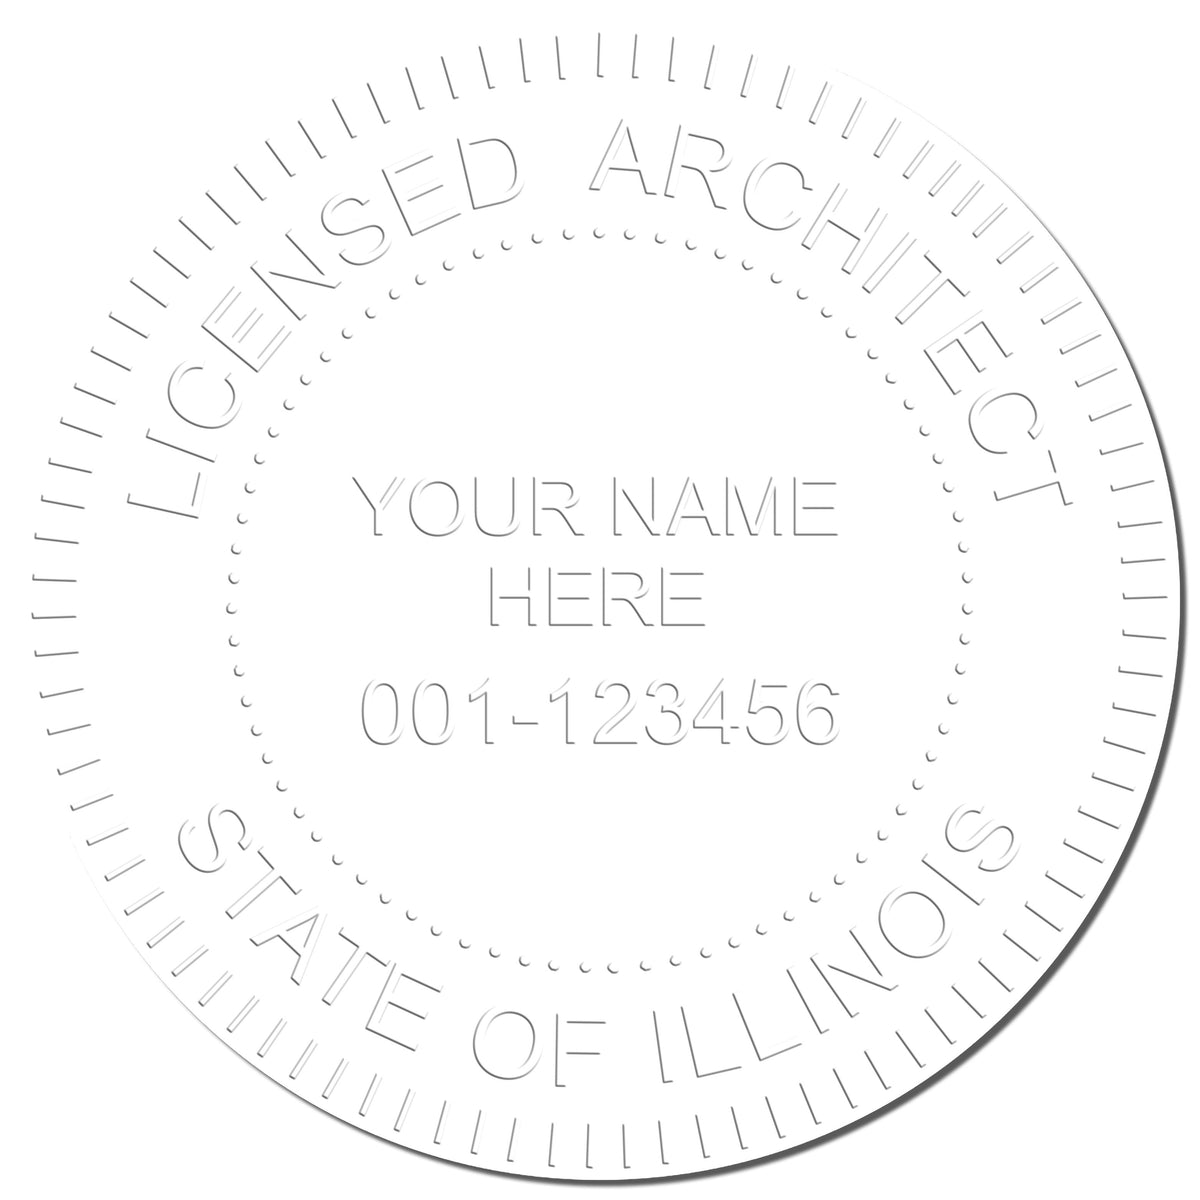 A photograph of the Extended Long Reach Illinois Architect Seal Embosser stamp impression reveals a vivid, professional image of the on paper.